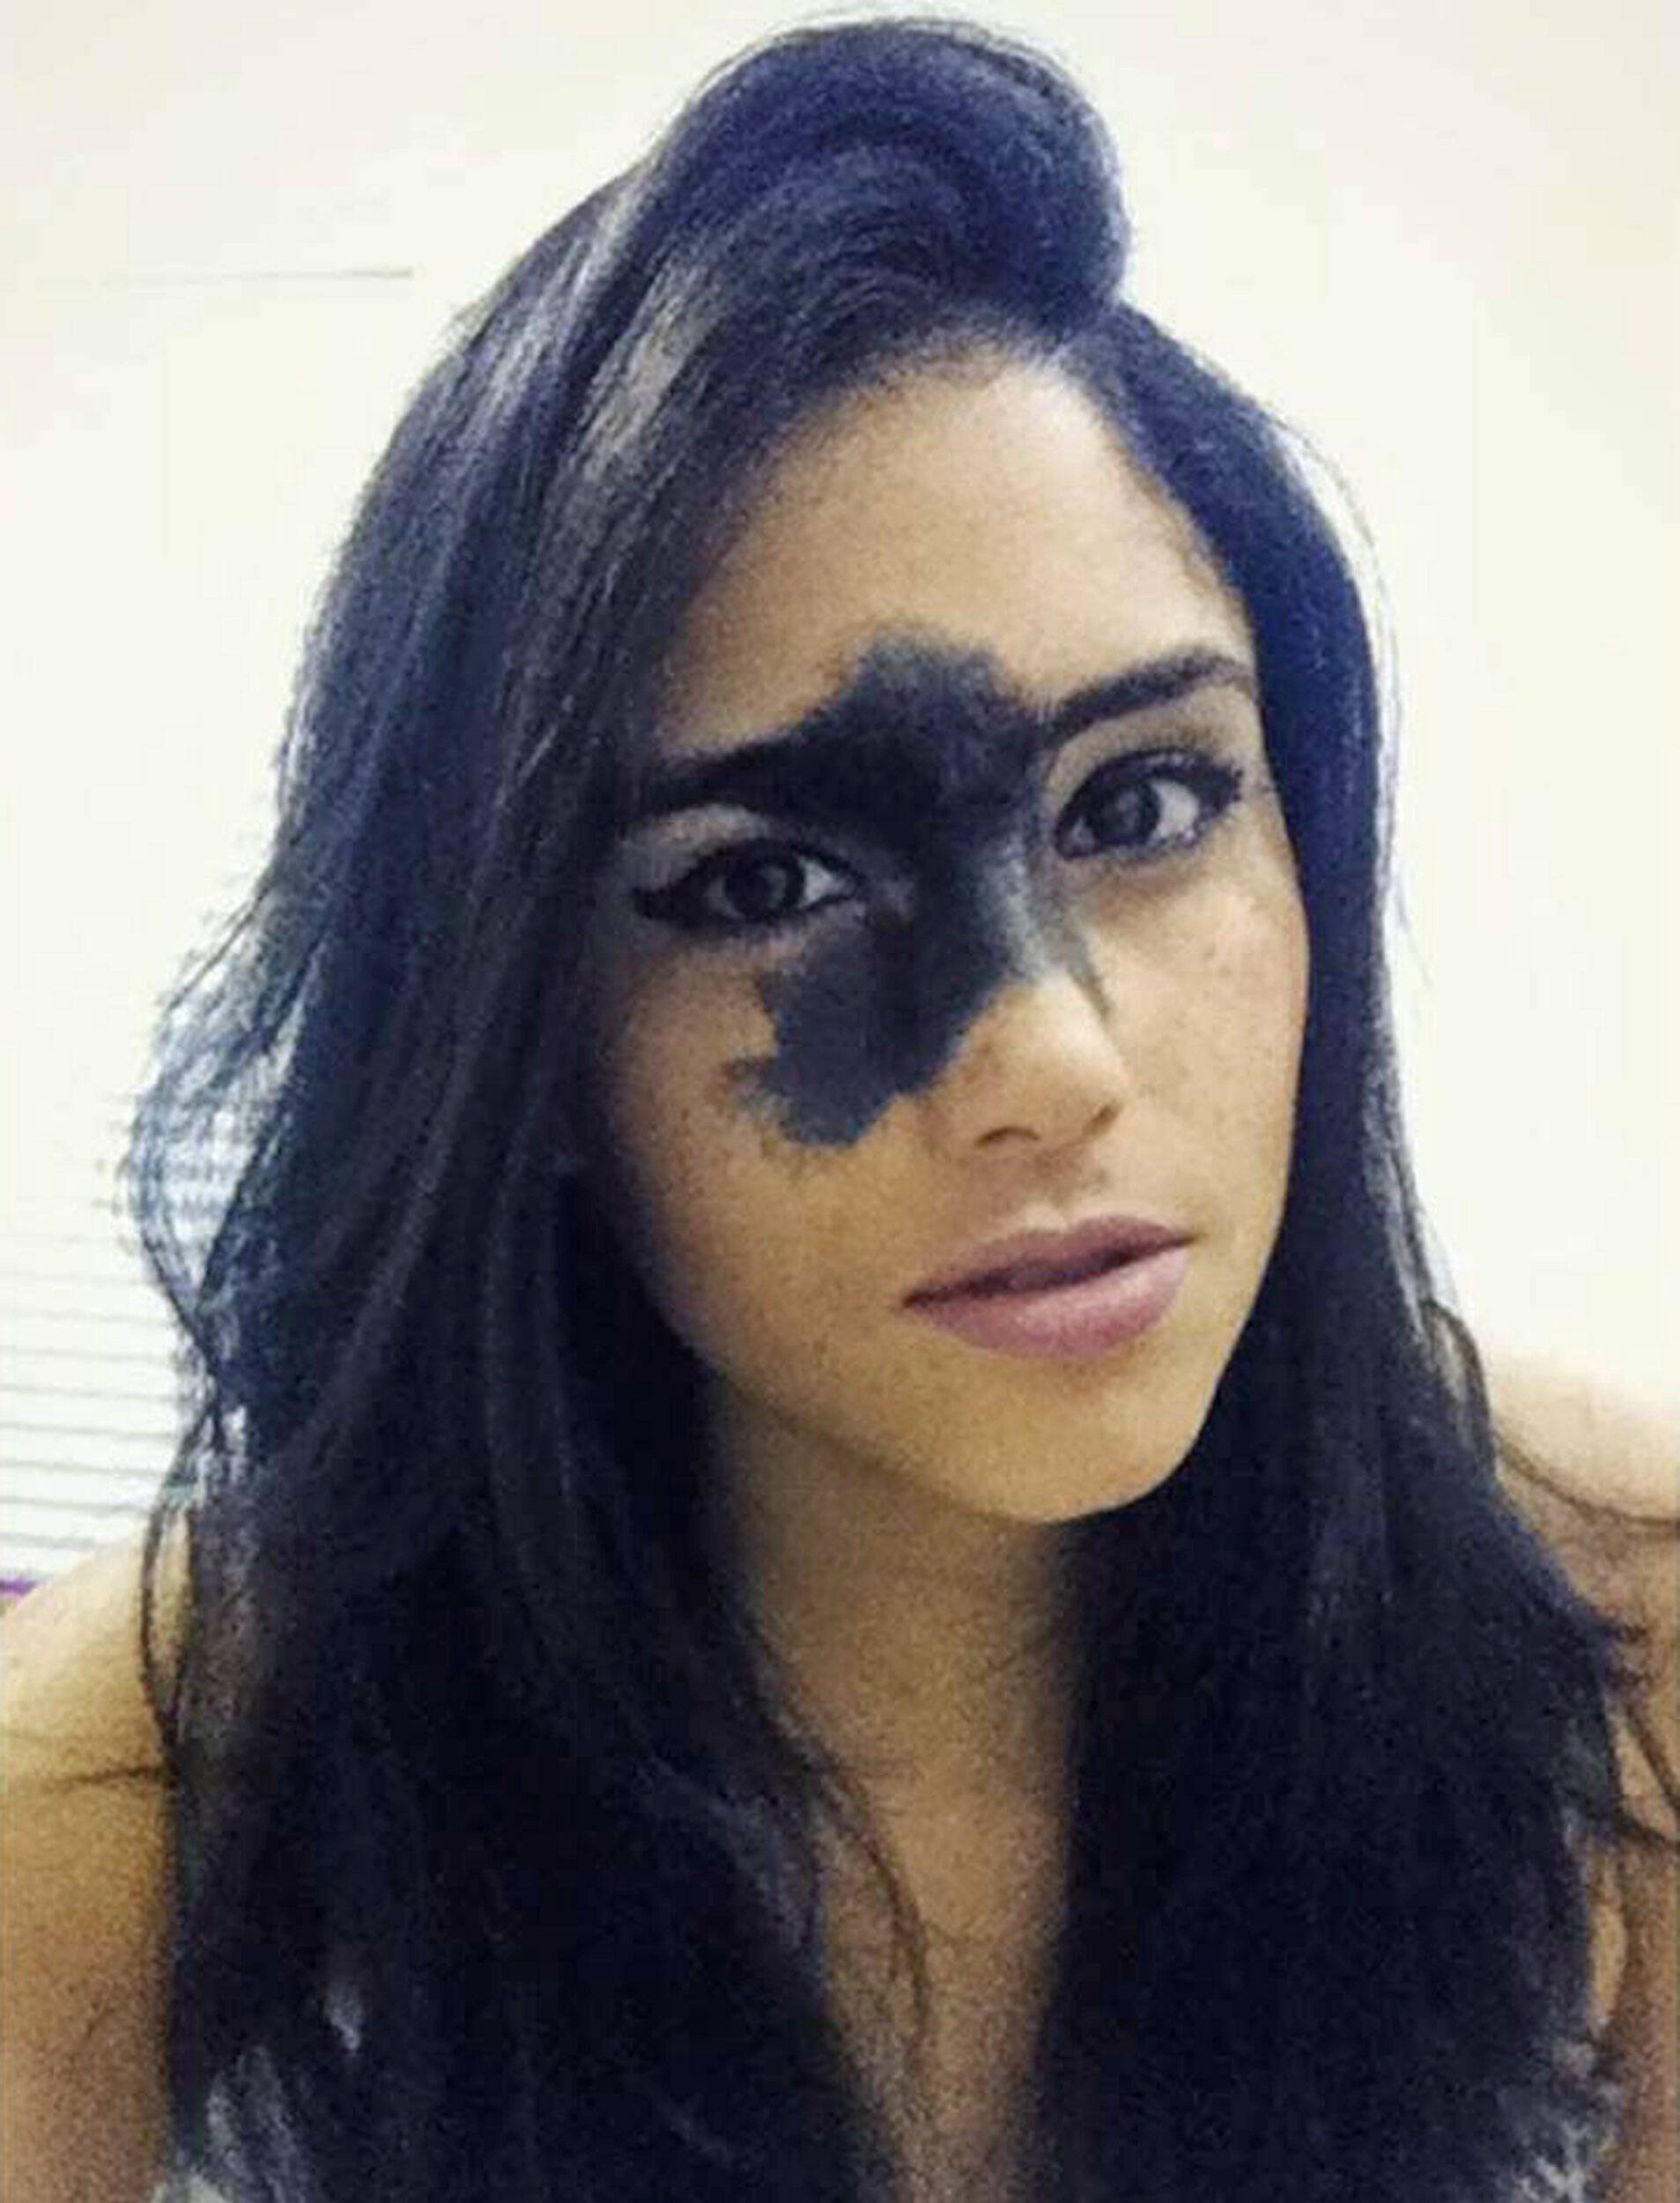 Model says facial birthmark makes her unique and refuses to be embarrassed